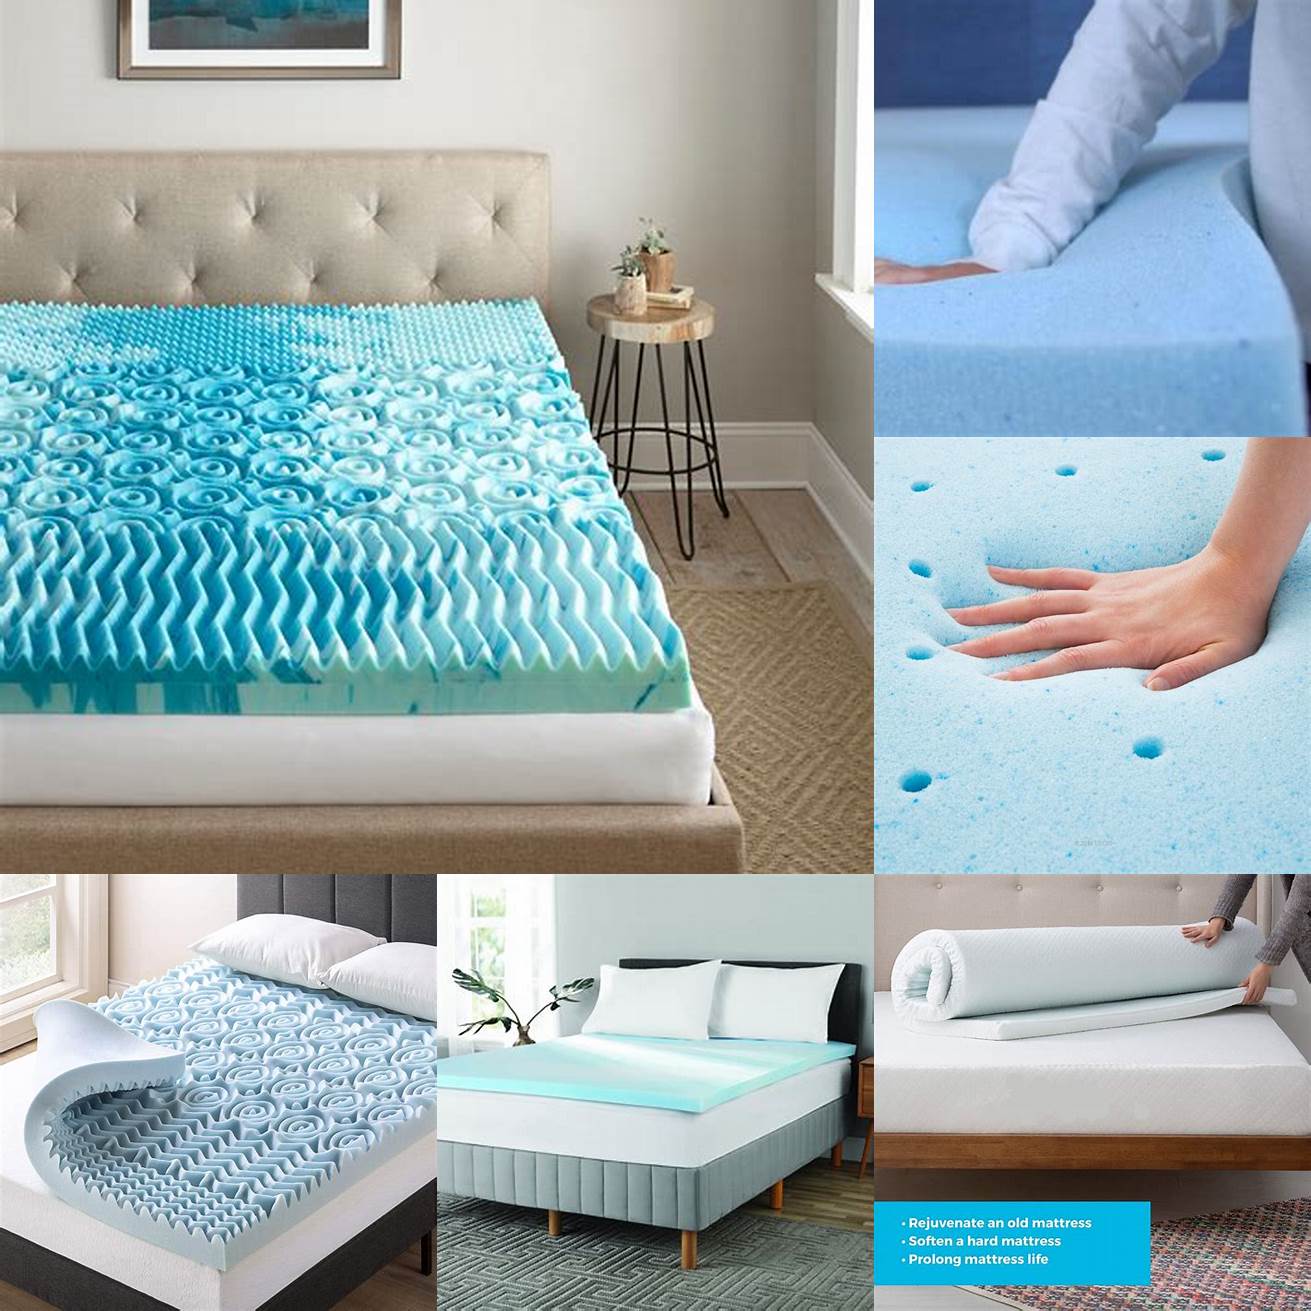 Gel memory foam Gel-infused memory foam is designed to be cooler than traditional memory foam making it a good choice for those who tend to sleep hot